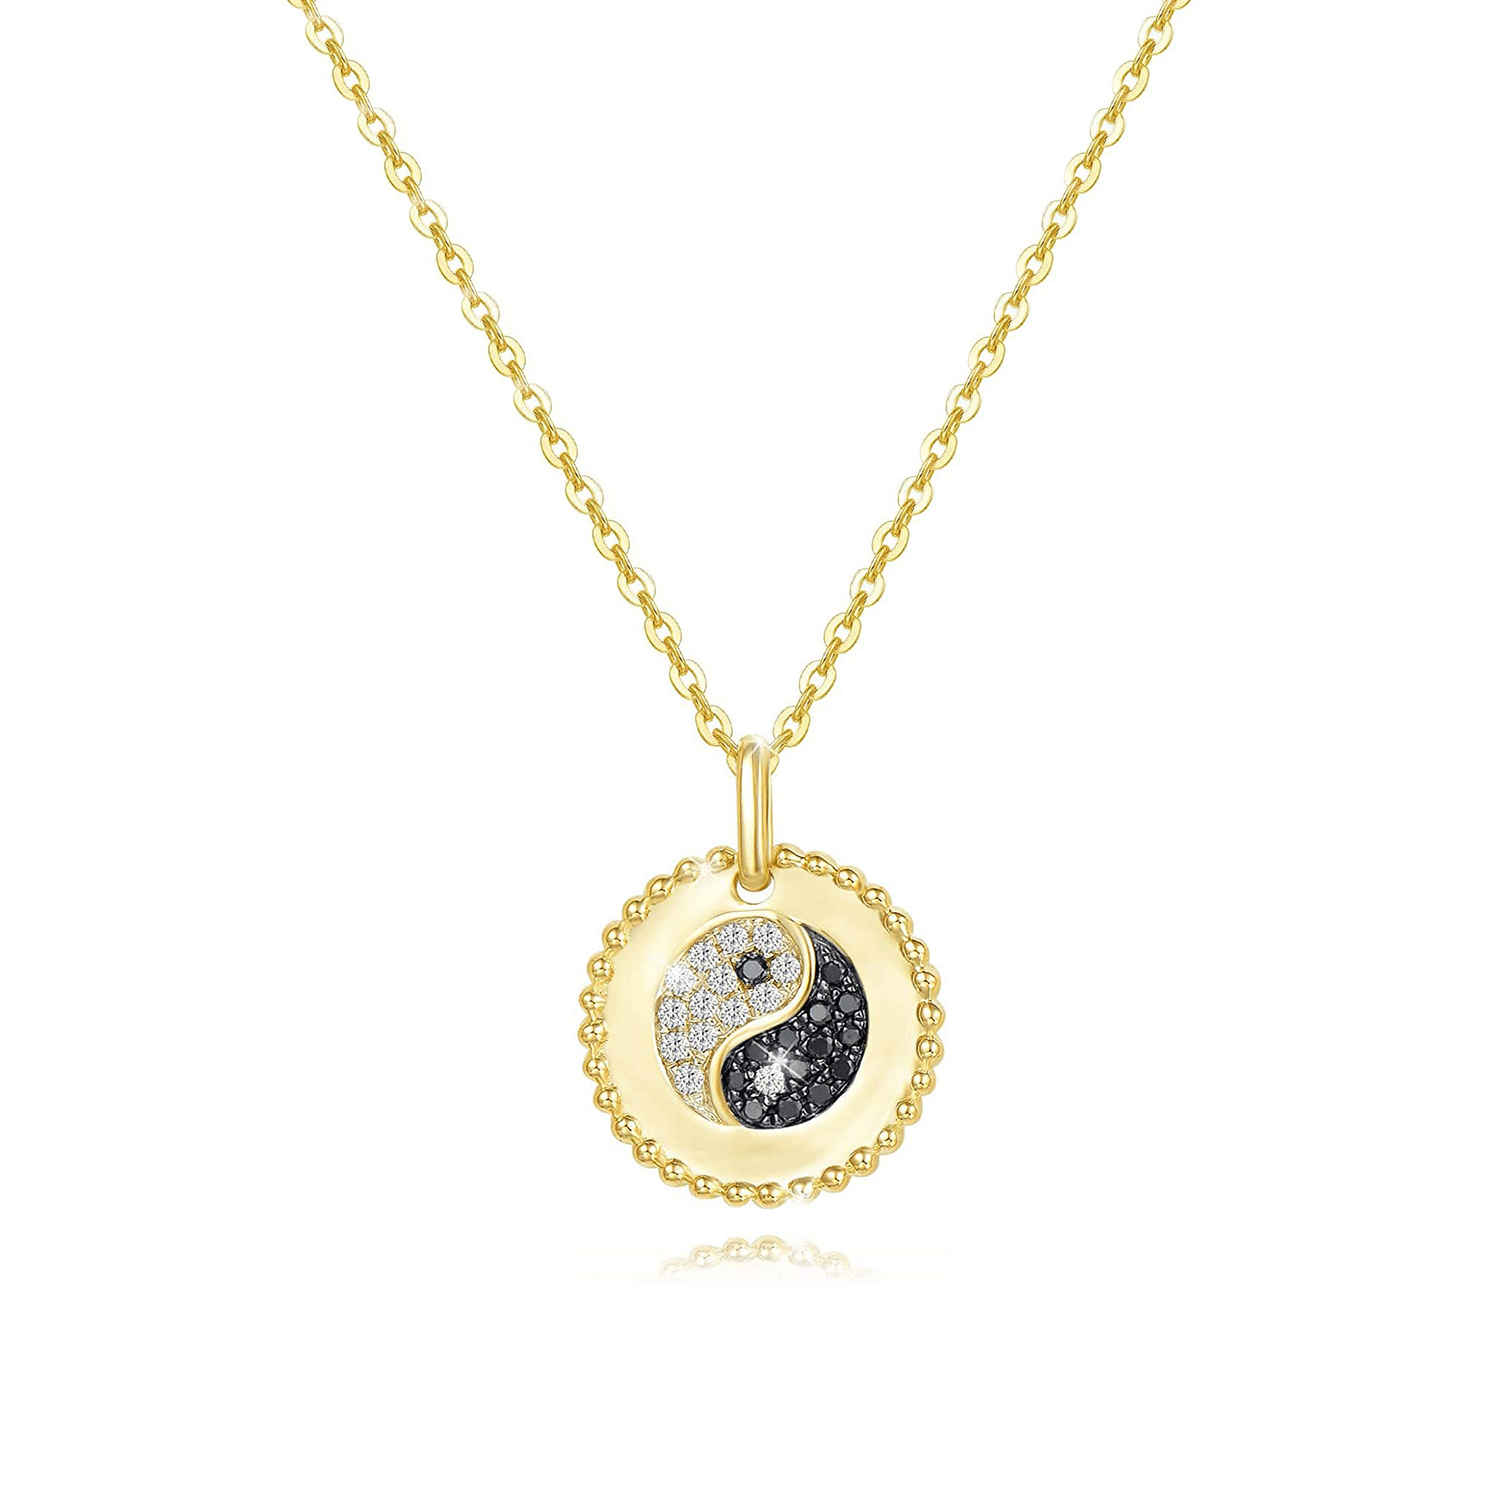 White and Black Diamond Mix Pendant Dainty Gold Necklace Disc Design on 18 inches long godl chain